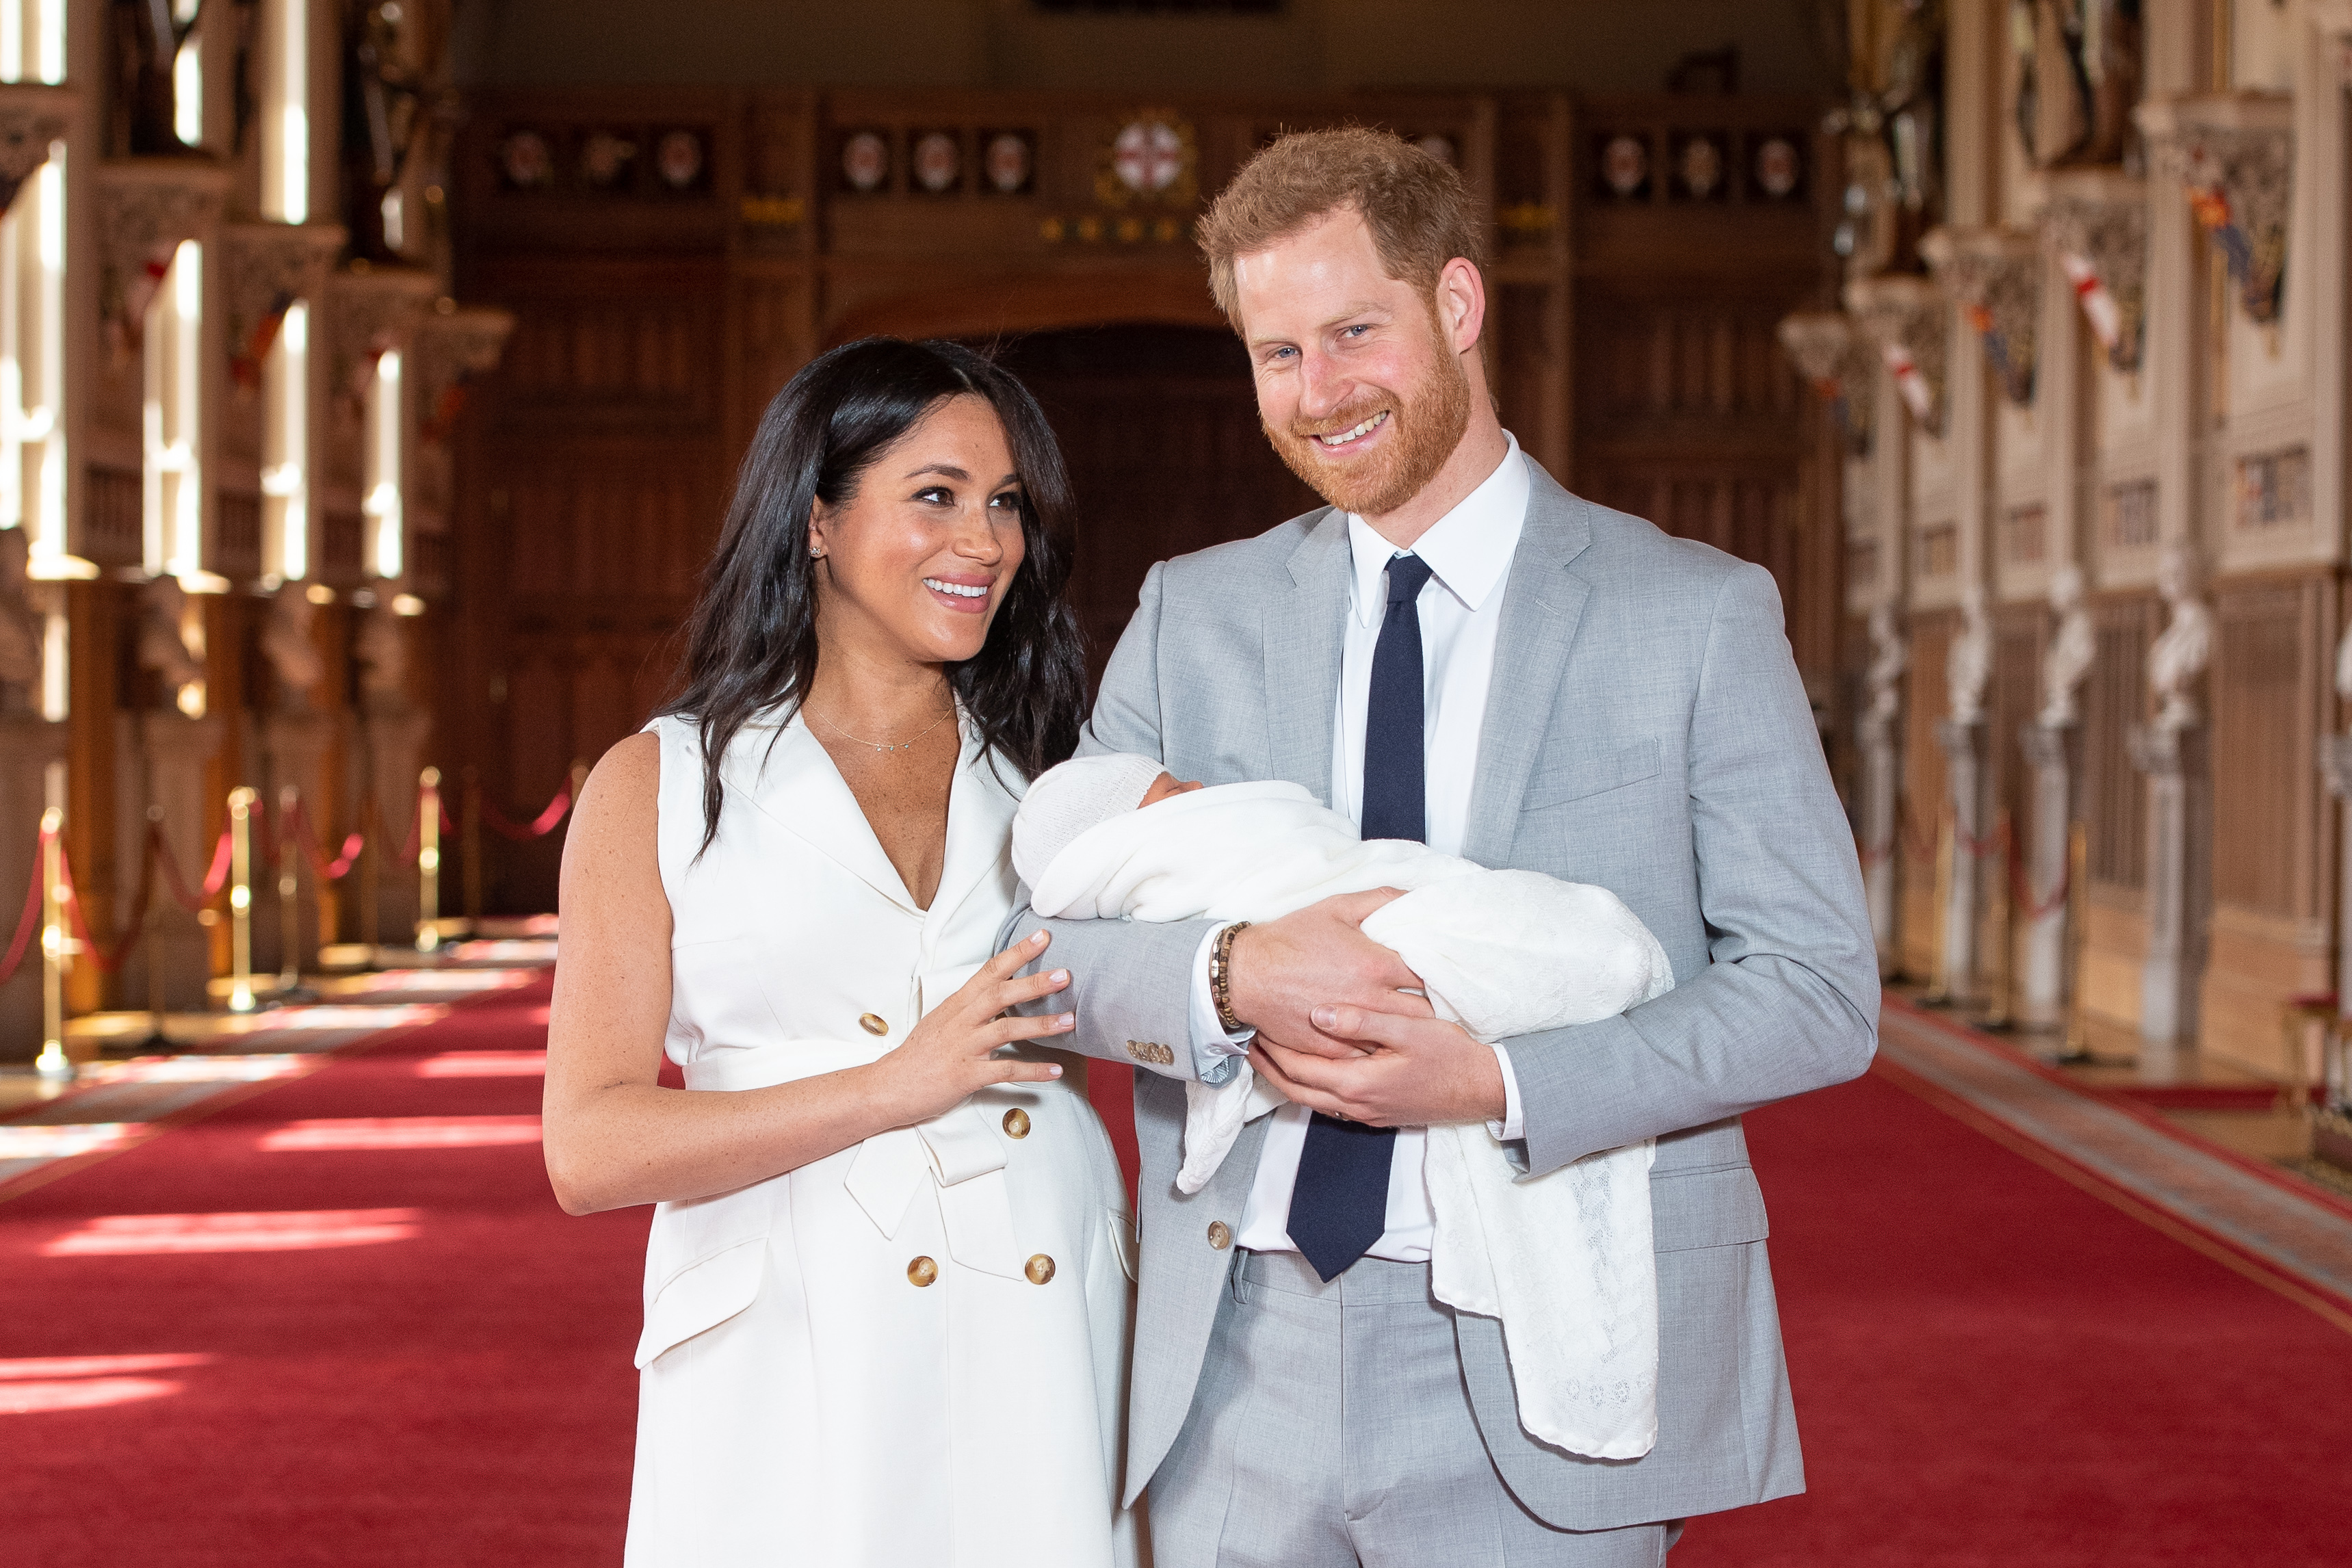 The Sussexes with baby Archie